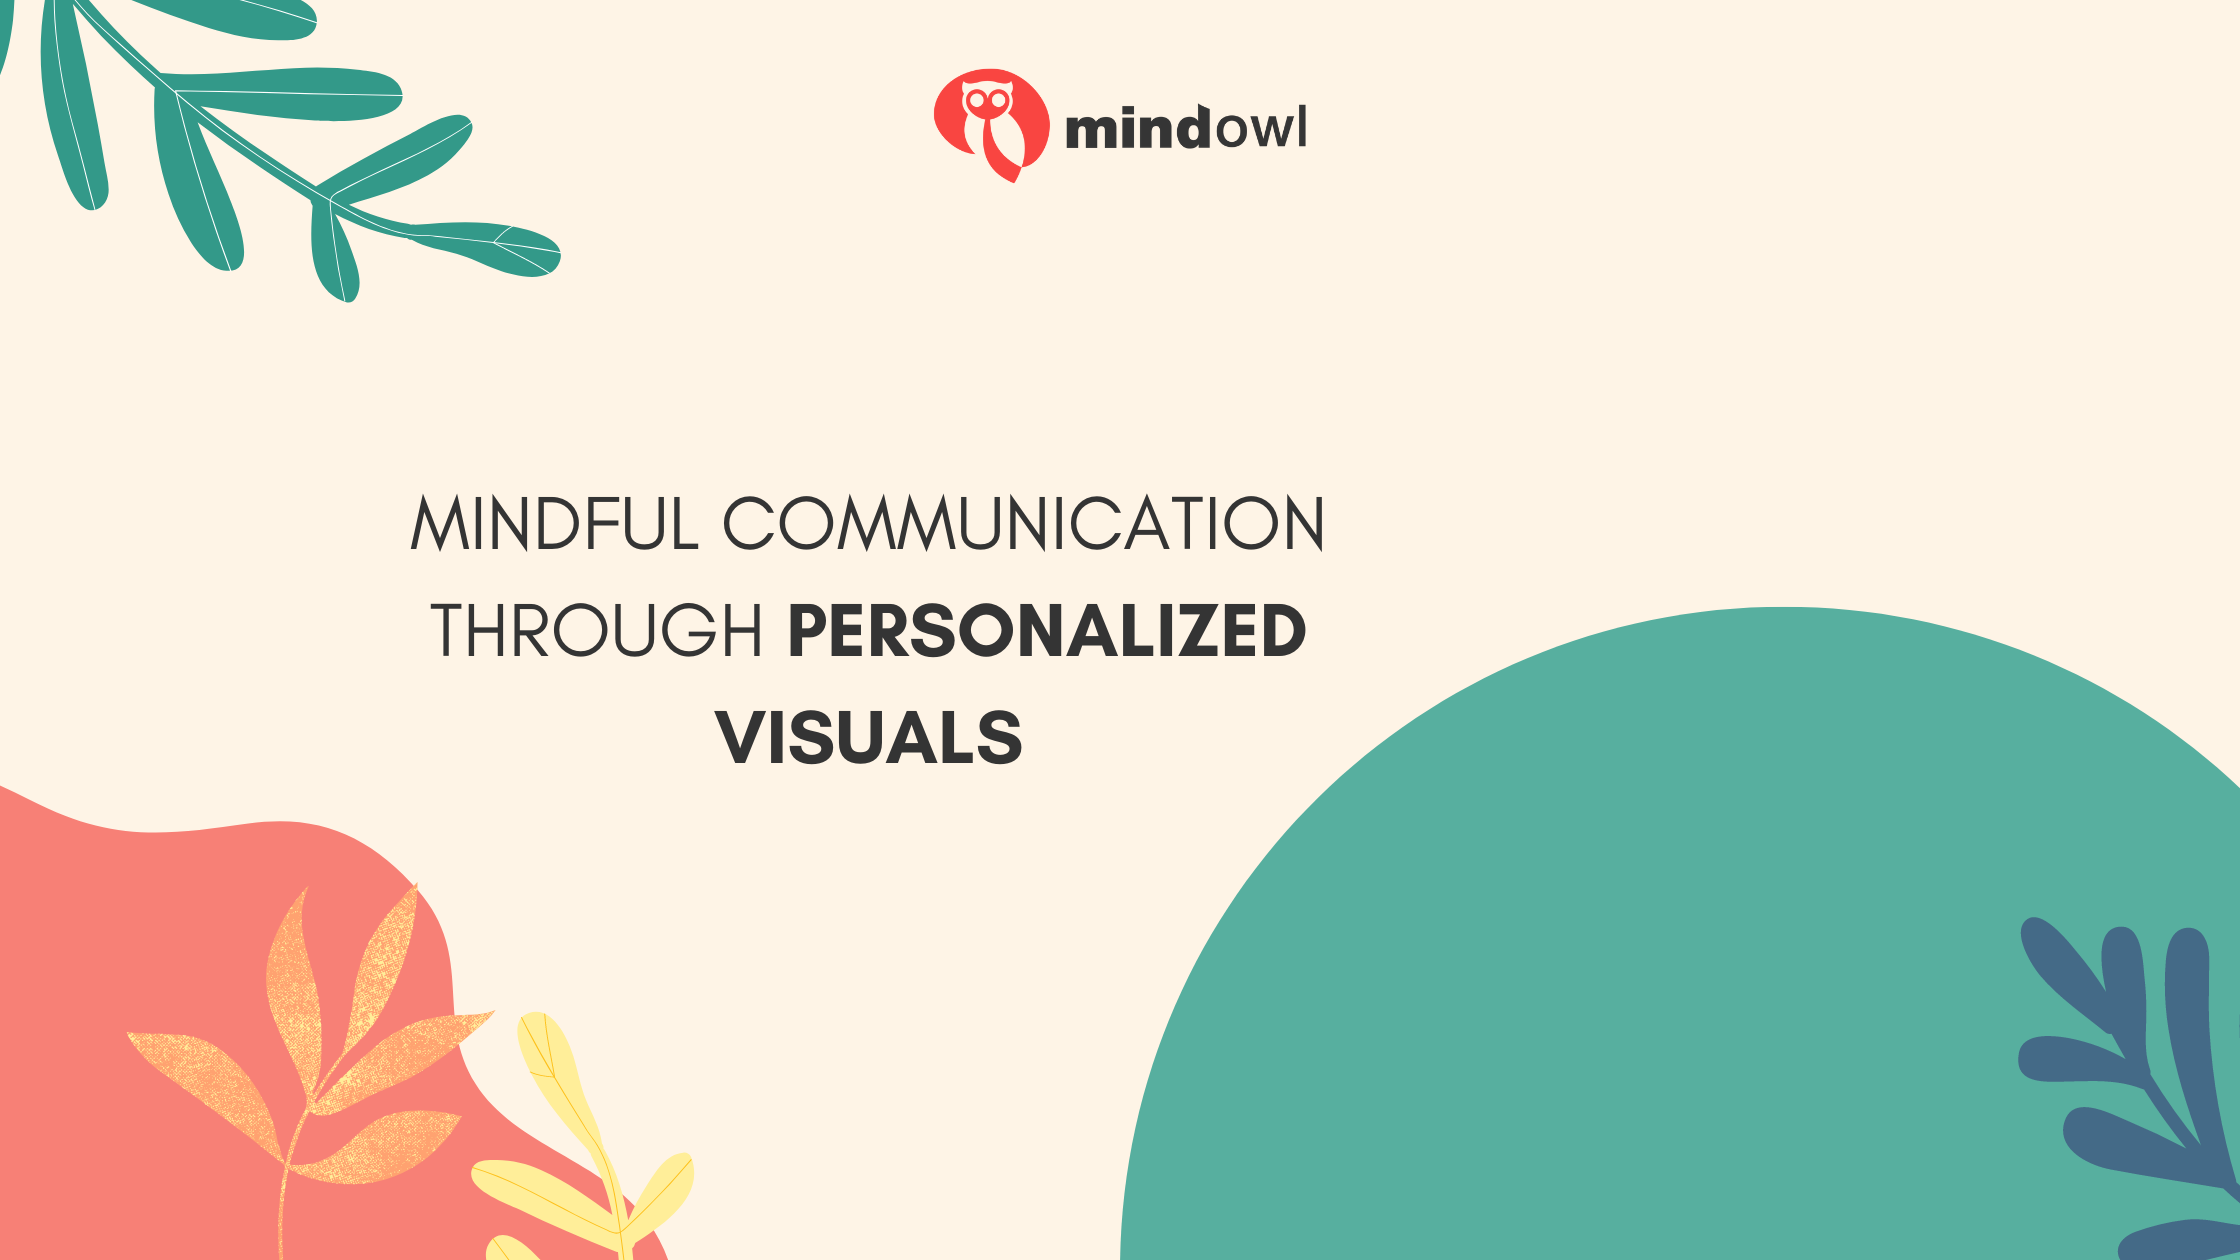 Mindful Communication Through Personalized Visuals